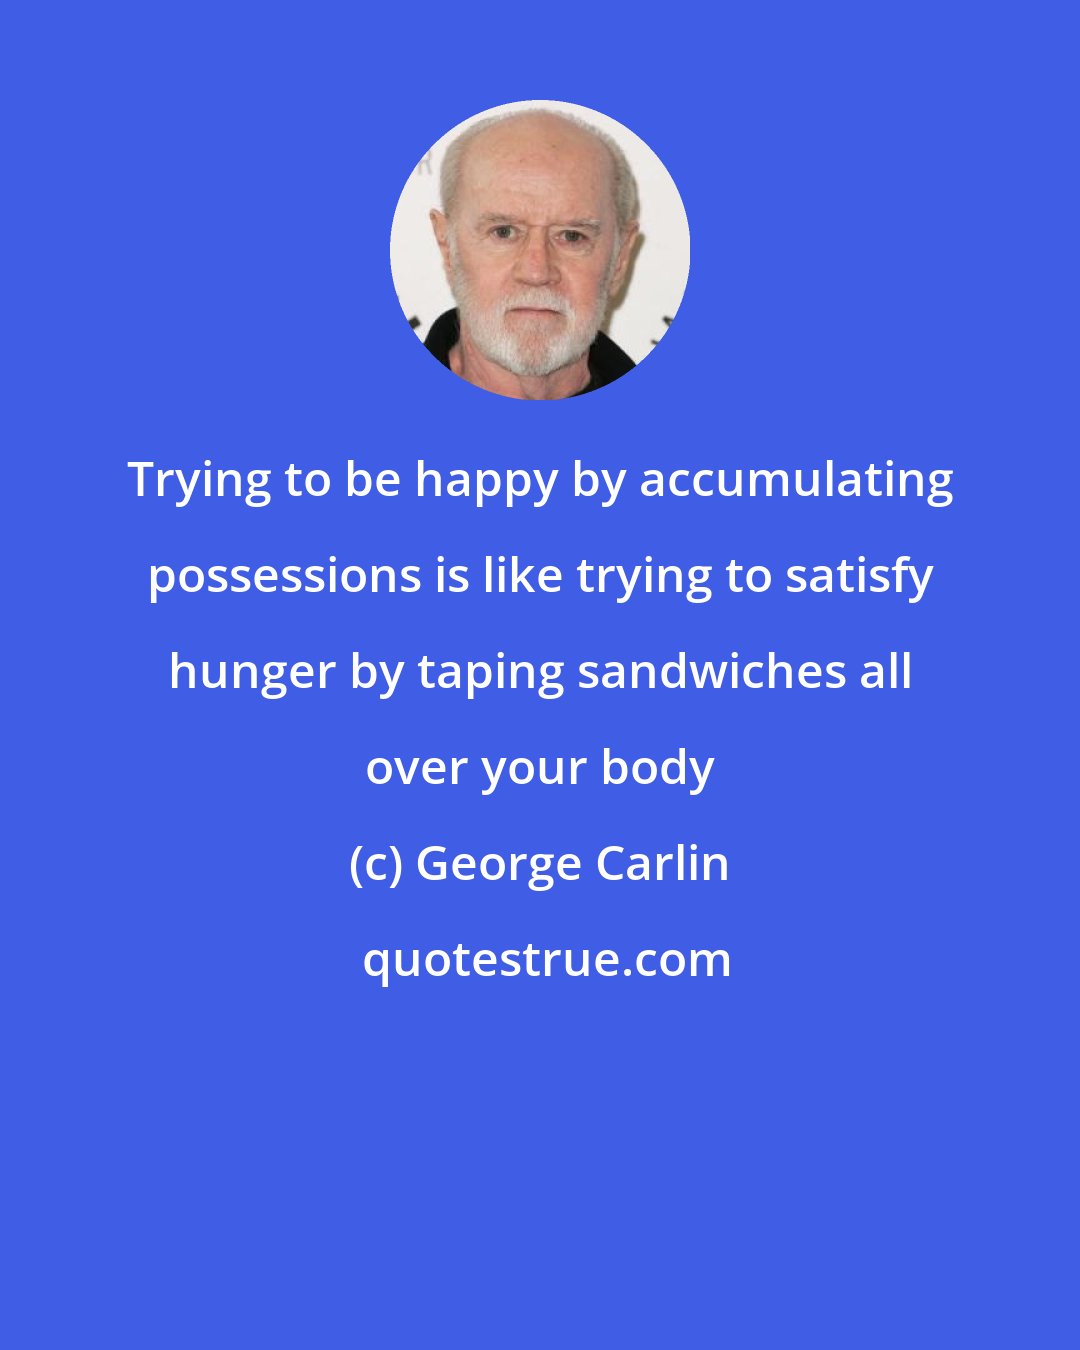 George Carlin: Trying to be happy by accumulating possessions is like trying to satisfy hunger by taping sandwiches all over your body